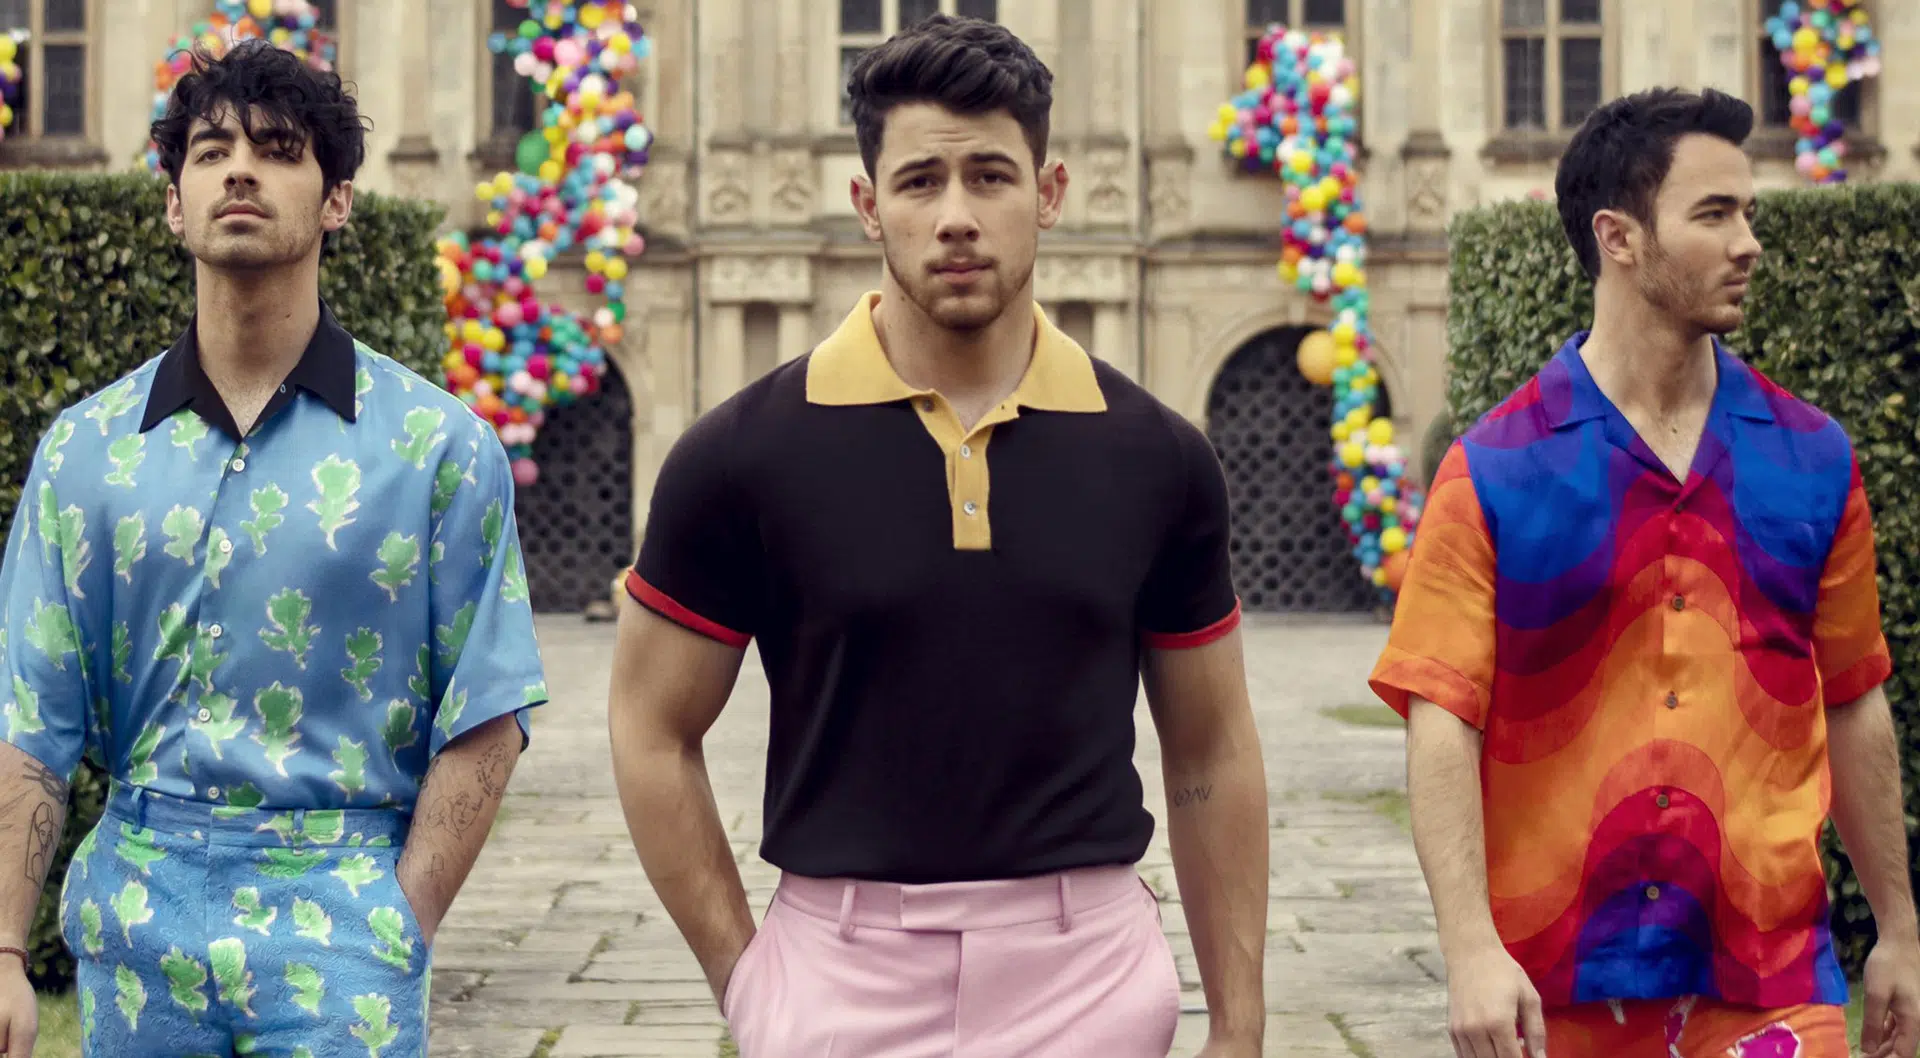 The Jonas Brothers to Release New Song 'Cool' This Friday